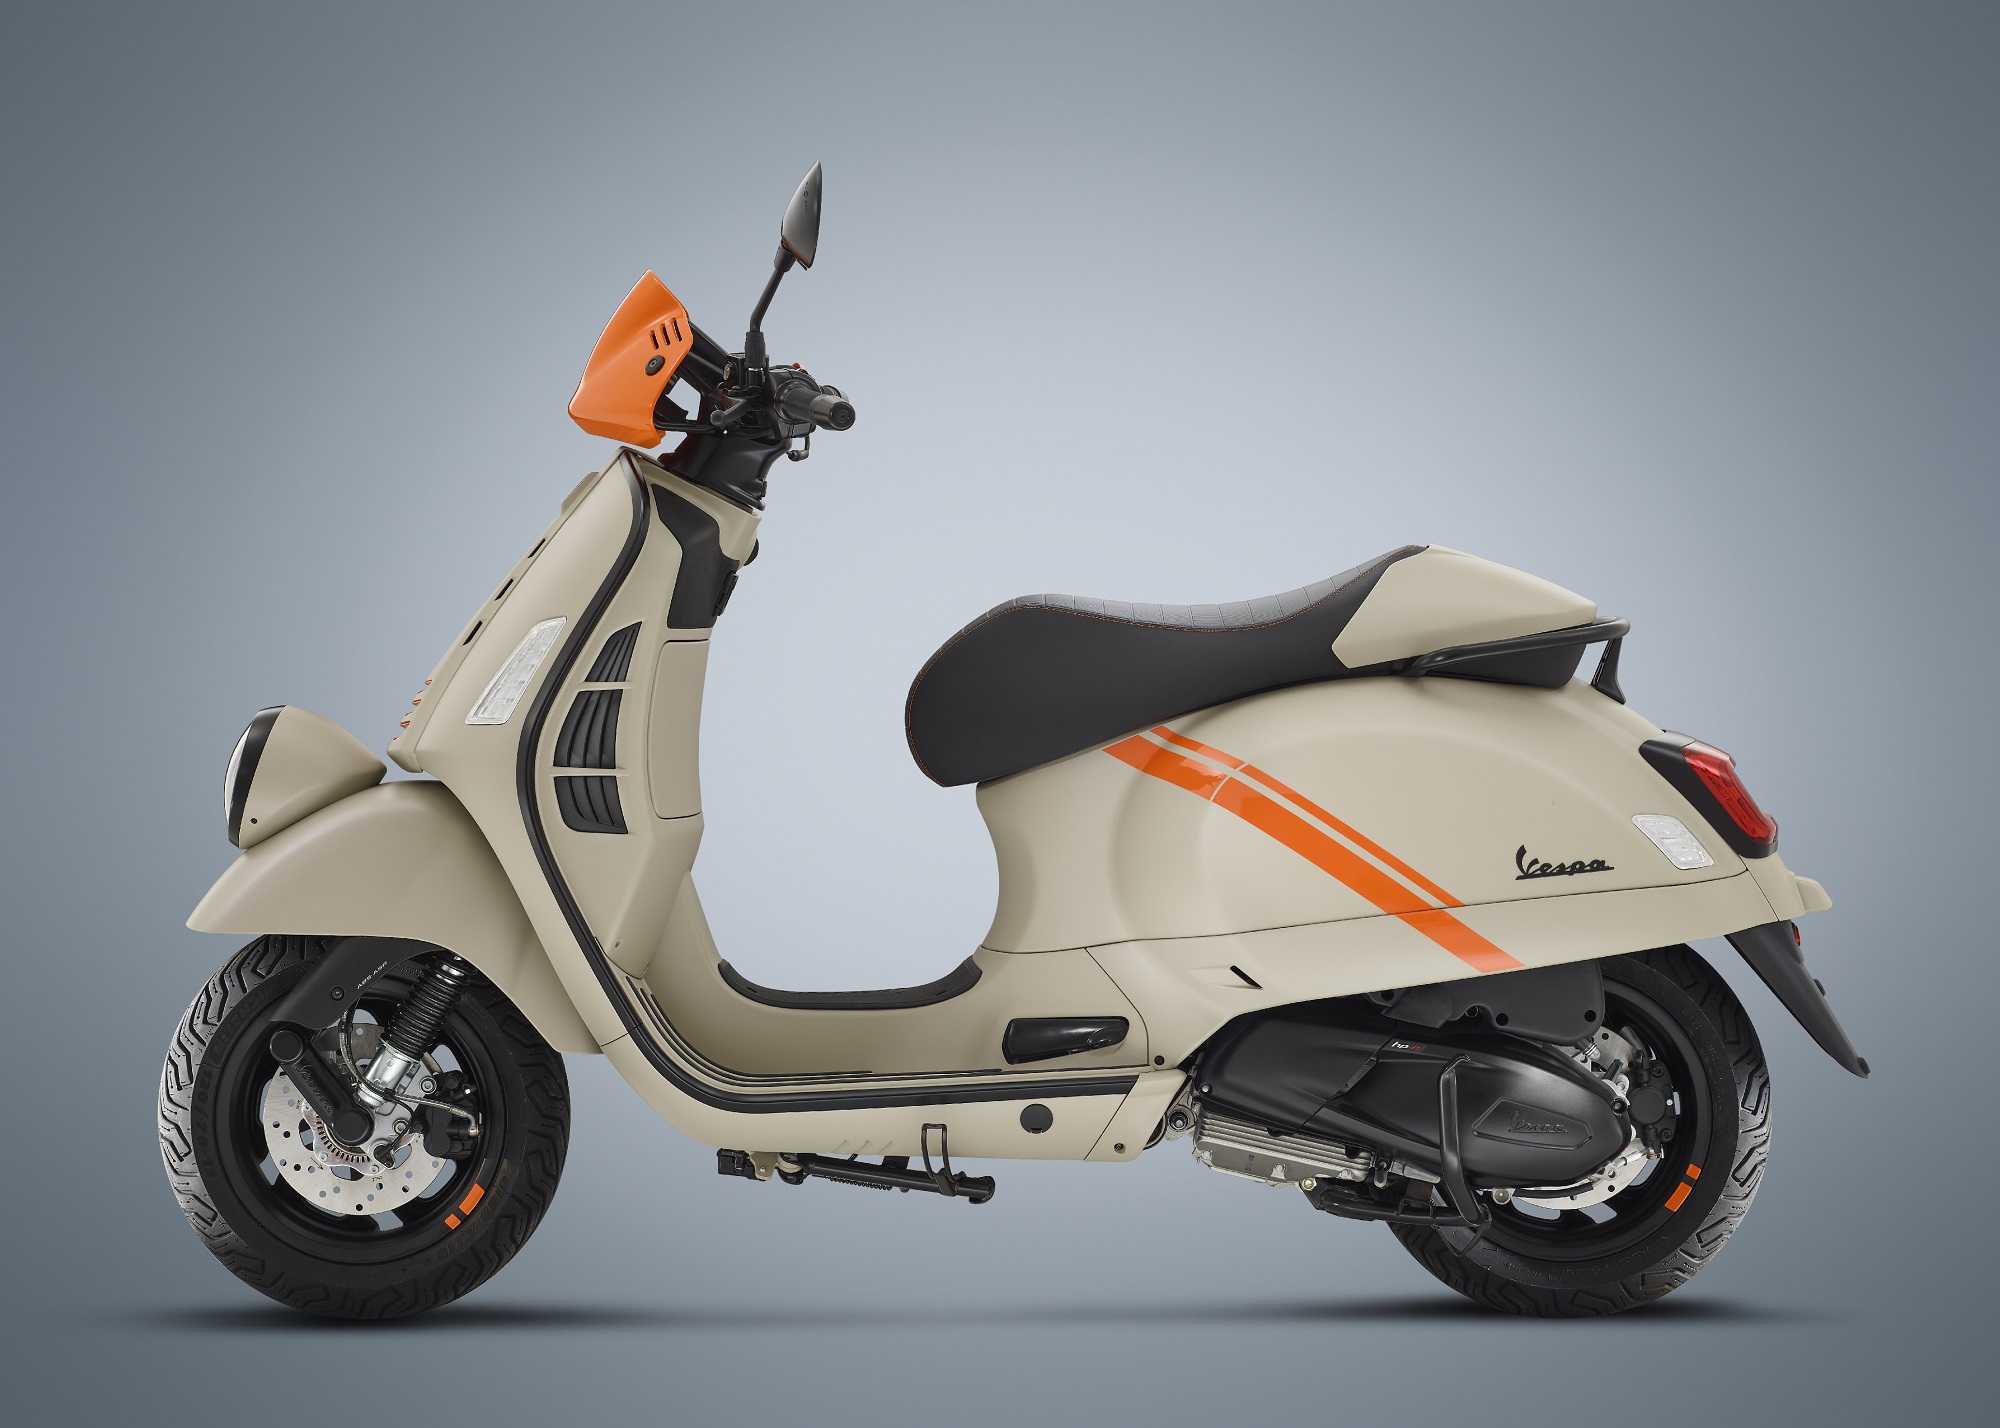 vespa-s-most-powerful-scooter-shown-to-put-dolce-vita-on-fast-forward